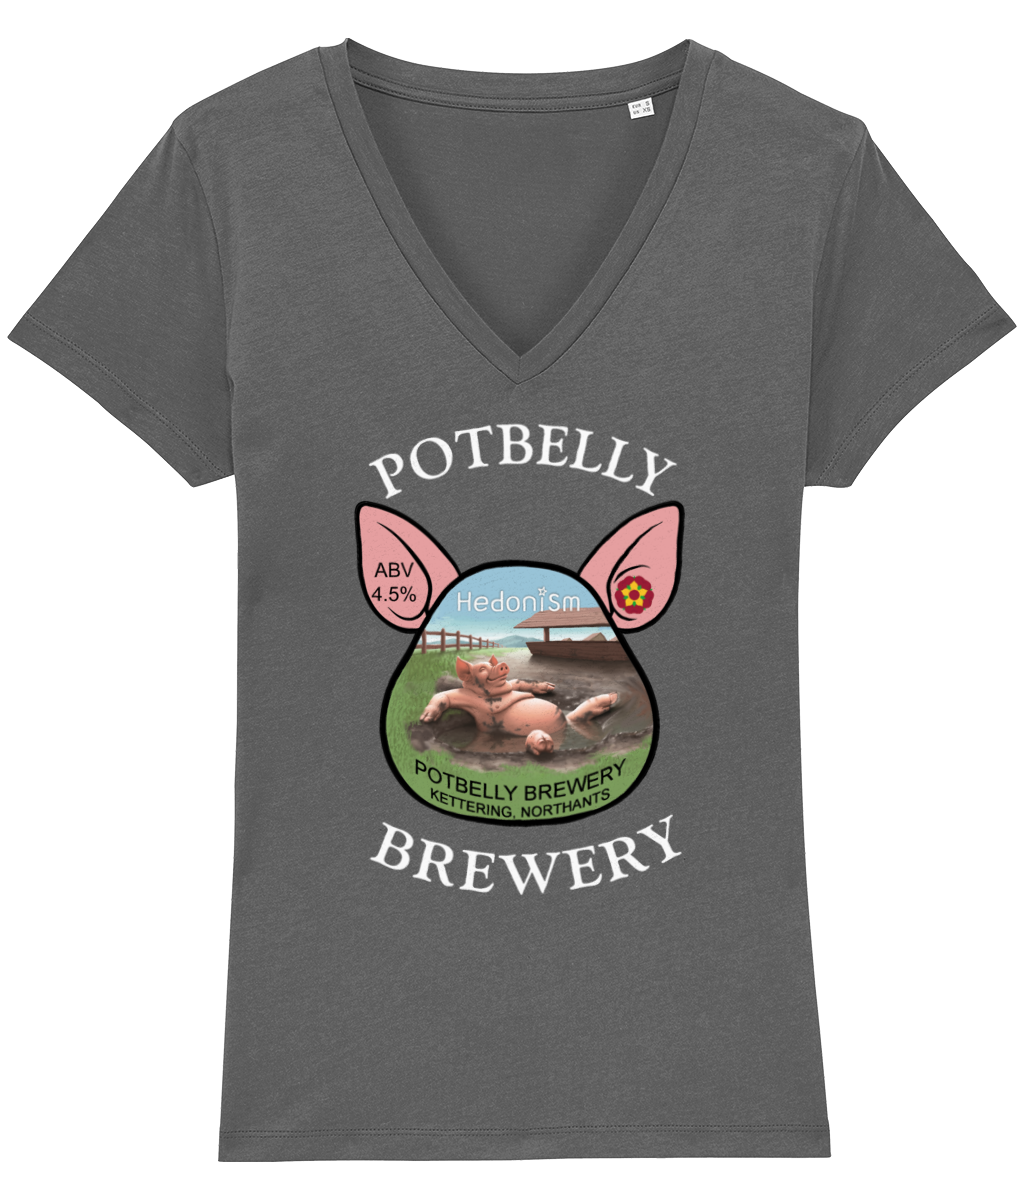 Ladies Cotton Potbelly Brewery Hedonism V-Neck T-Shirt